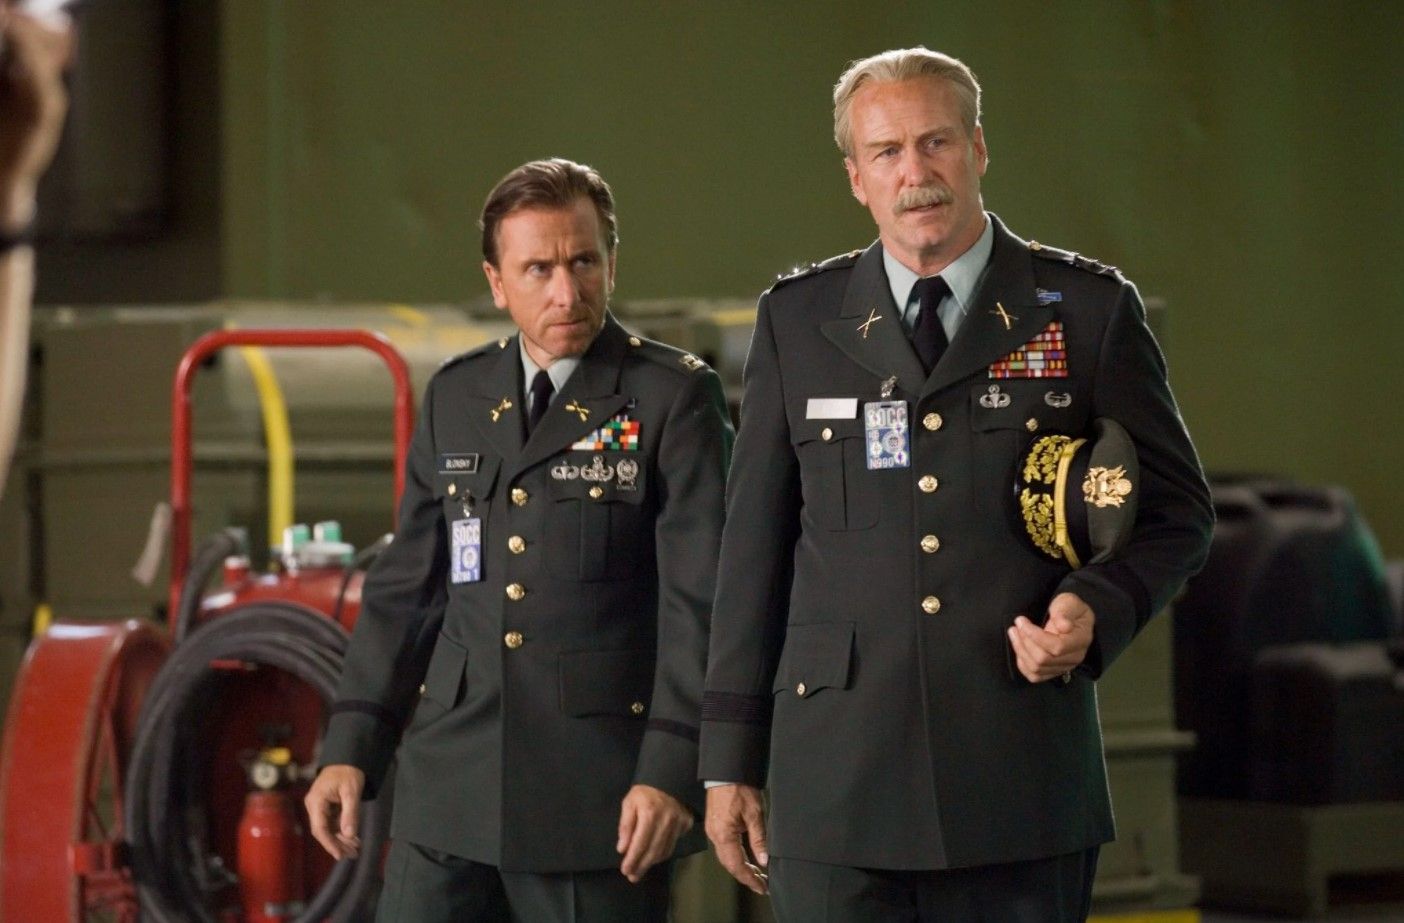 MCU's General Thaddeus E Thunderbolt Ross played by William Hurt